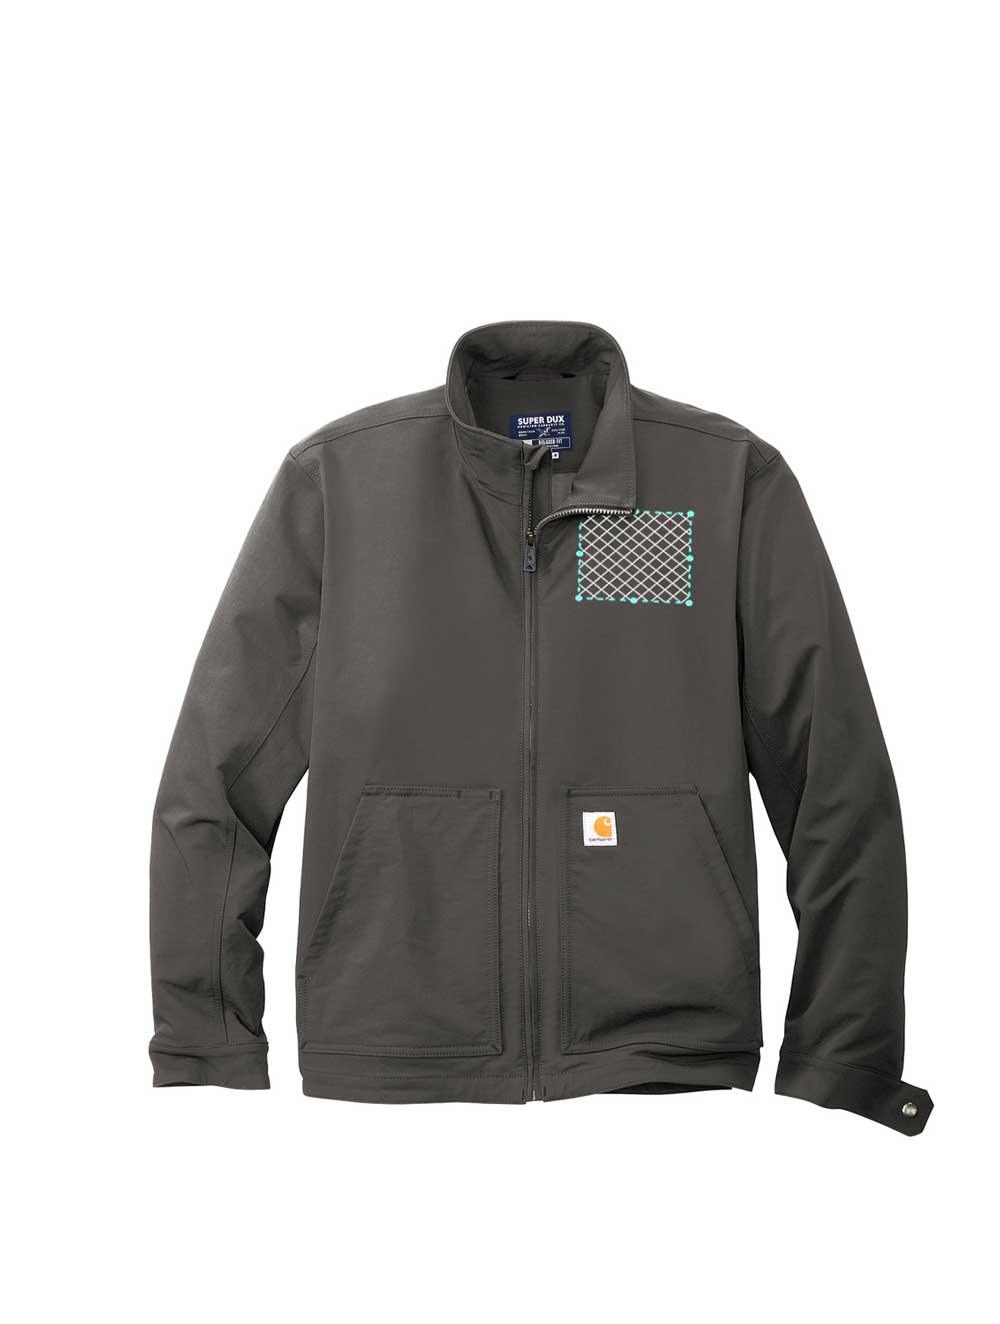 Embroidered Carhartt® Super Dux™ Soft Shell Jacket - Constantly Create Shop